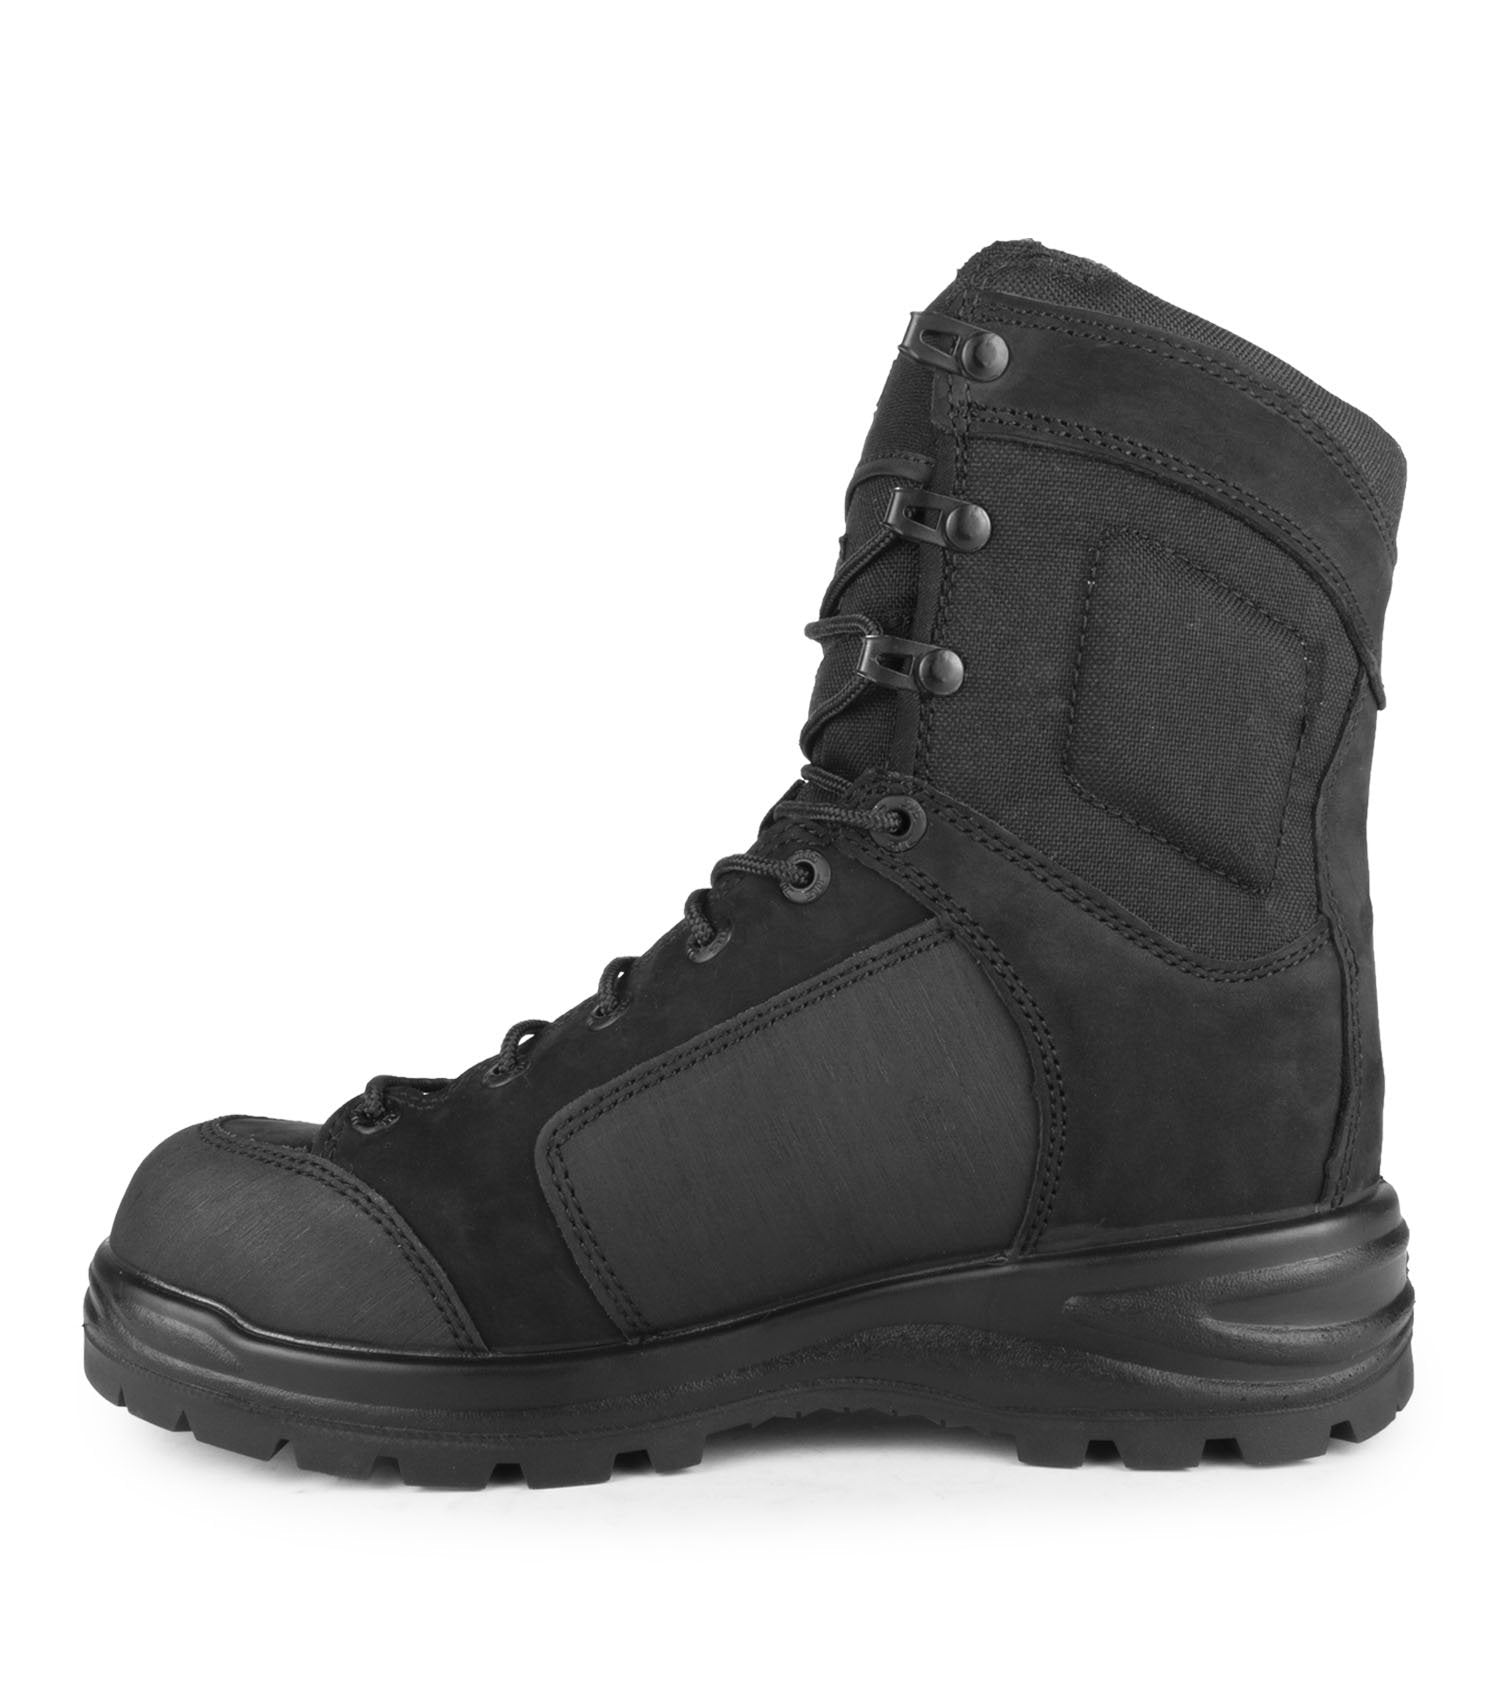 STC Malden Tactical Boot | Black | Sizes 6 - 14 Work Boots - Cleanflow